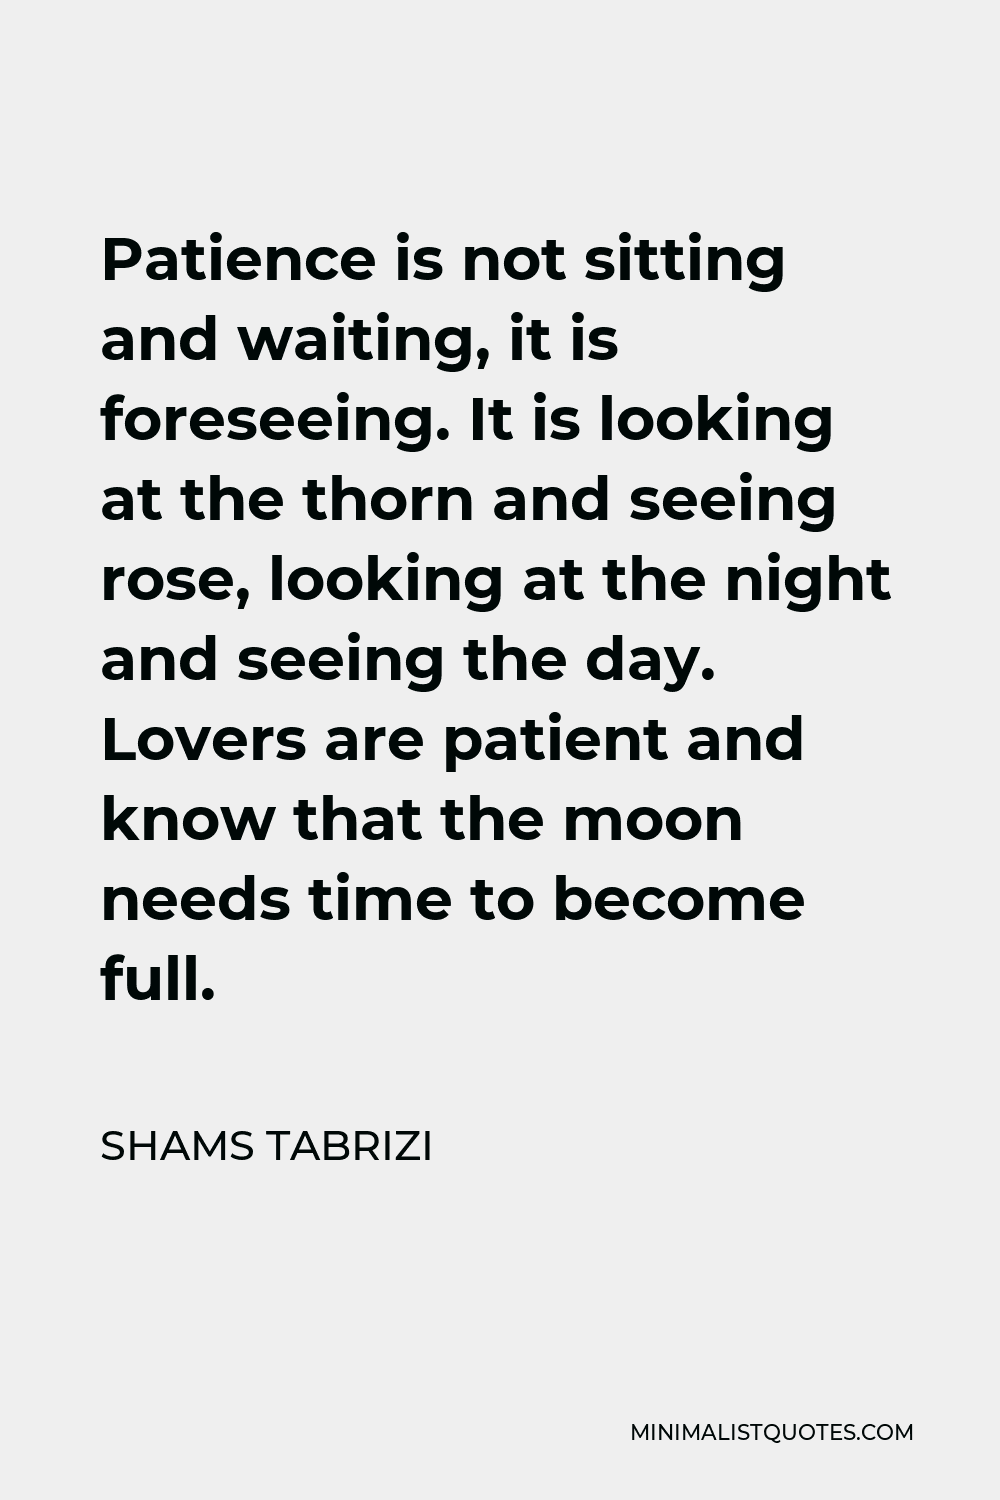 Shams Tabrizi Quote - Patience is not sitting and waiting, it is foreseeing. It is looking at the thorn and seeing rose, looking at the night and seeing the day. Lovers are patient and know that the moon needs time to become full.